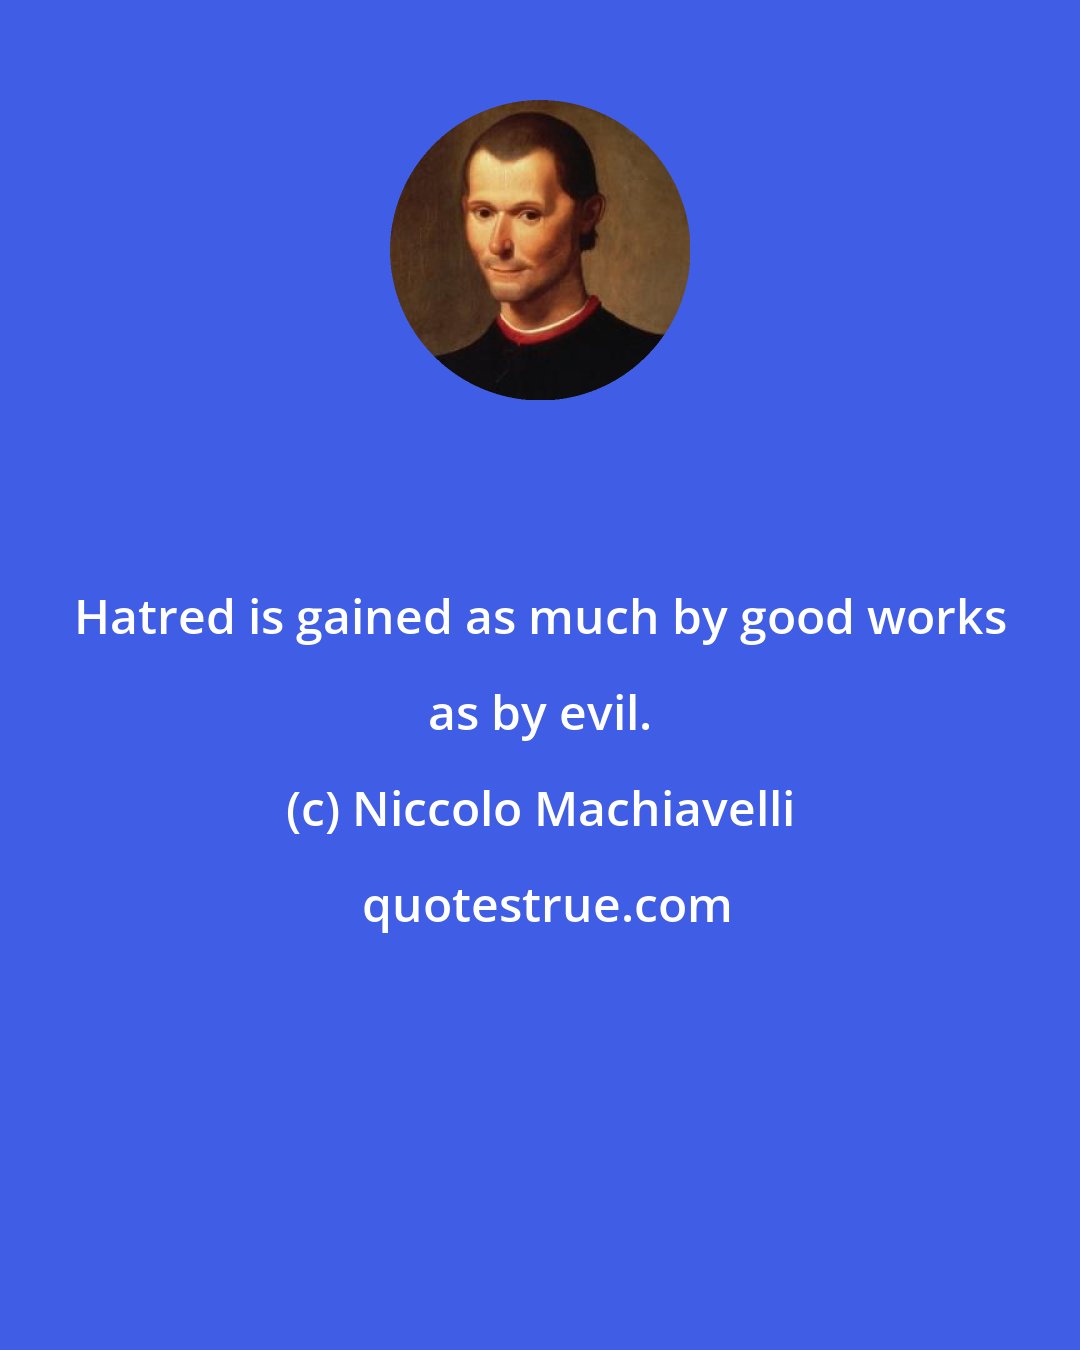 Niccolo Machiavelli: Hatred is gained as much by good works as by evil.